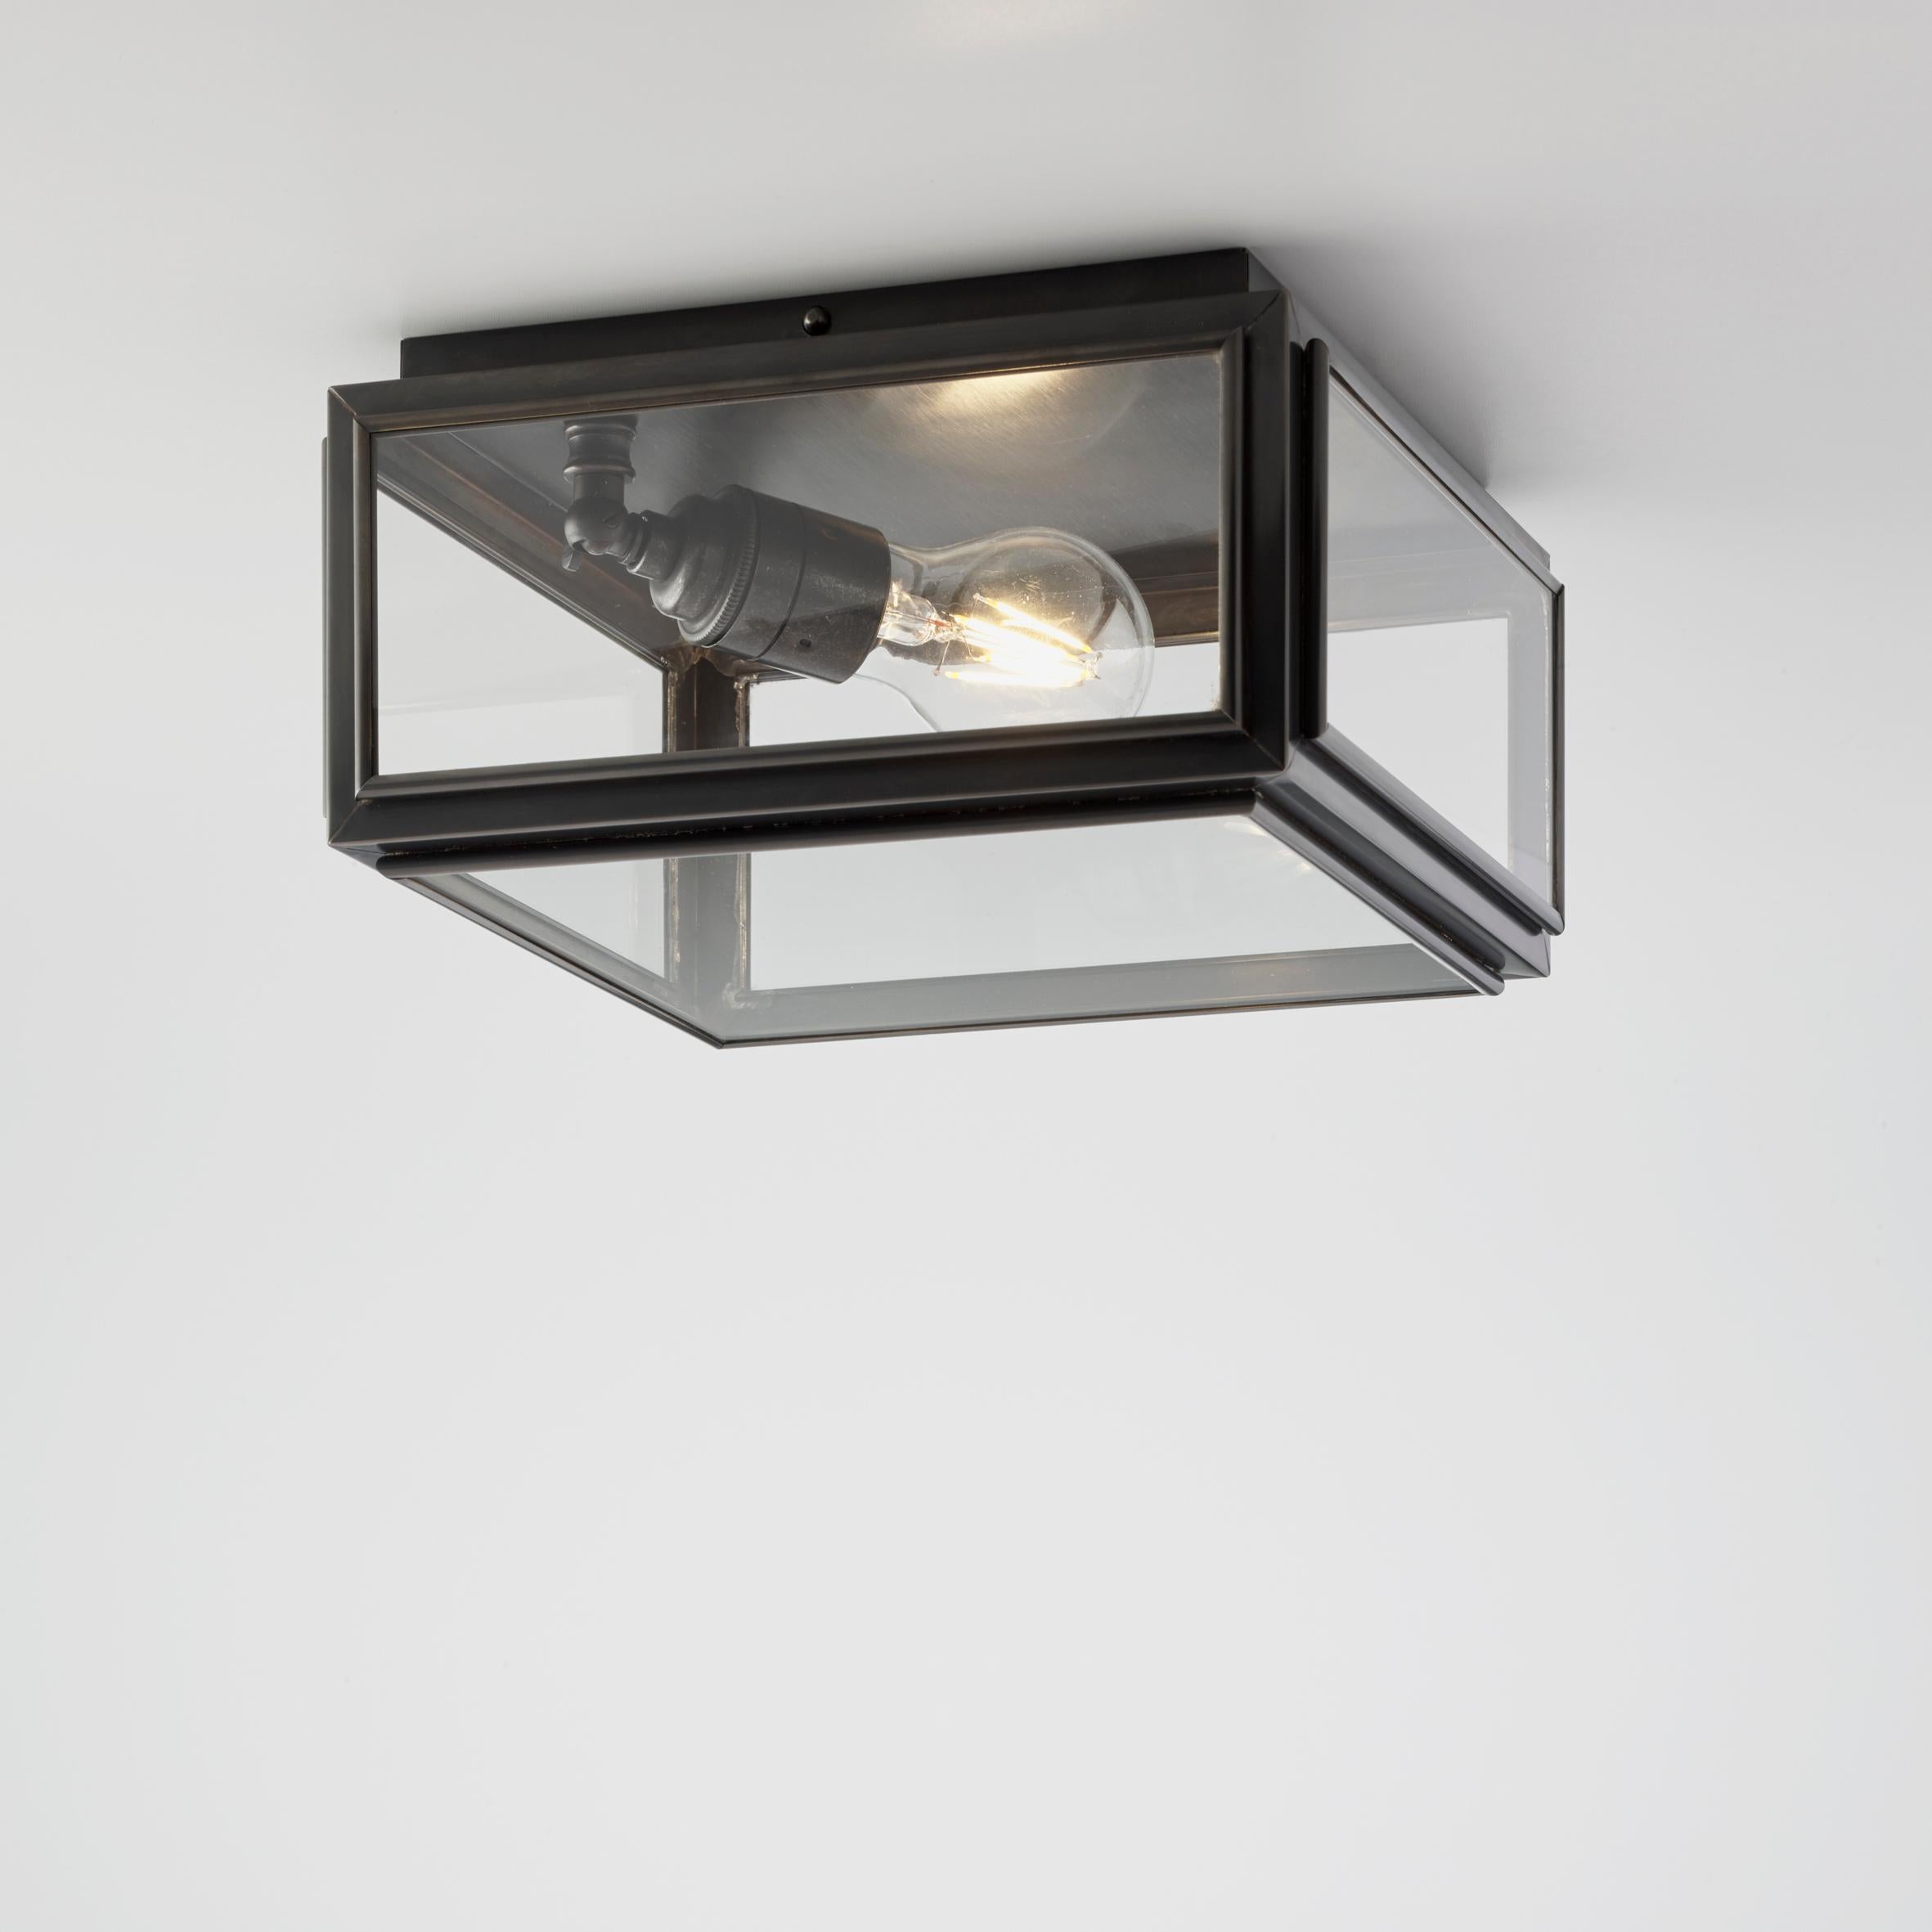 What is a flush ceiling light?